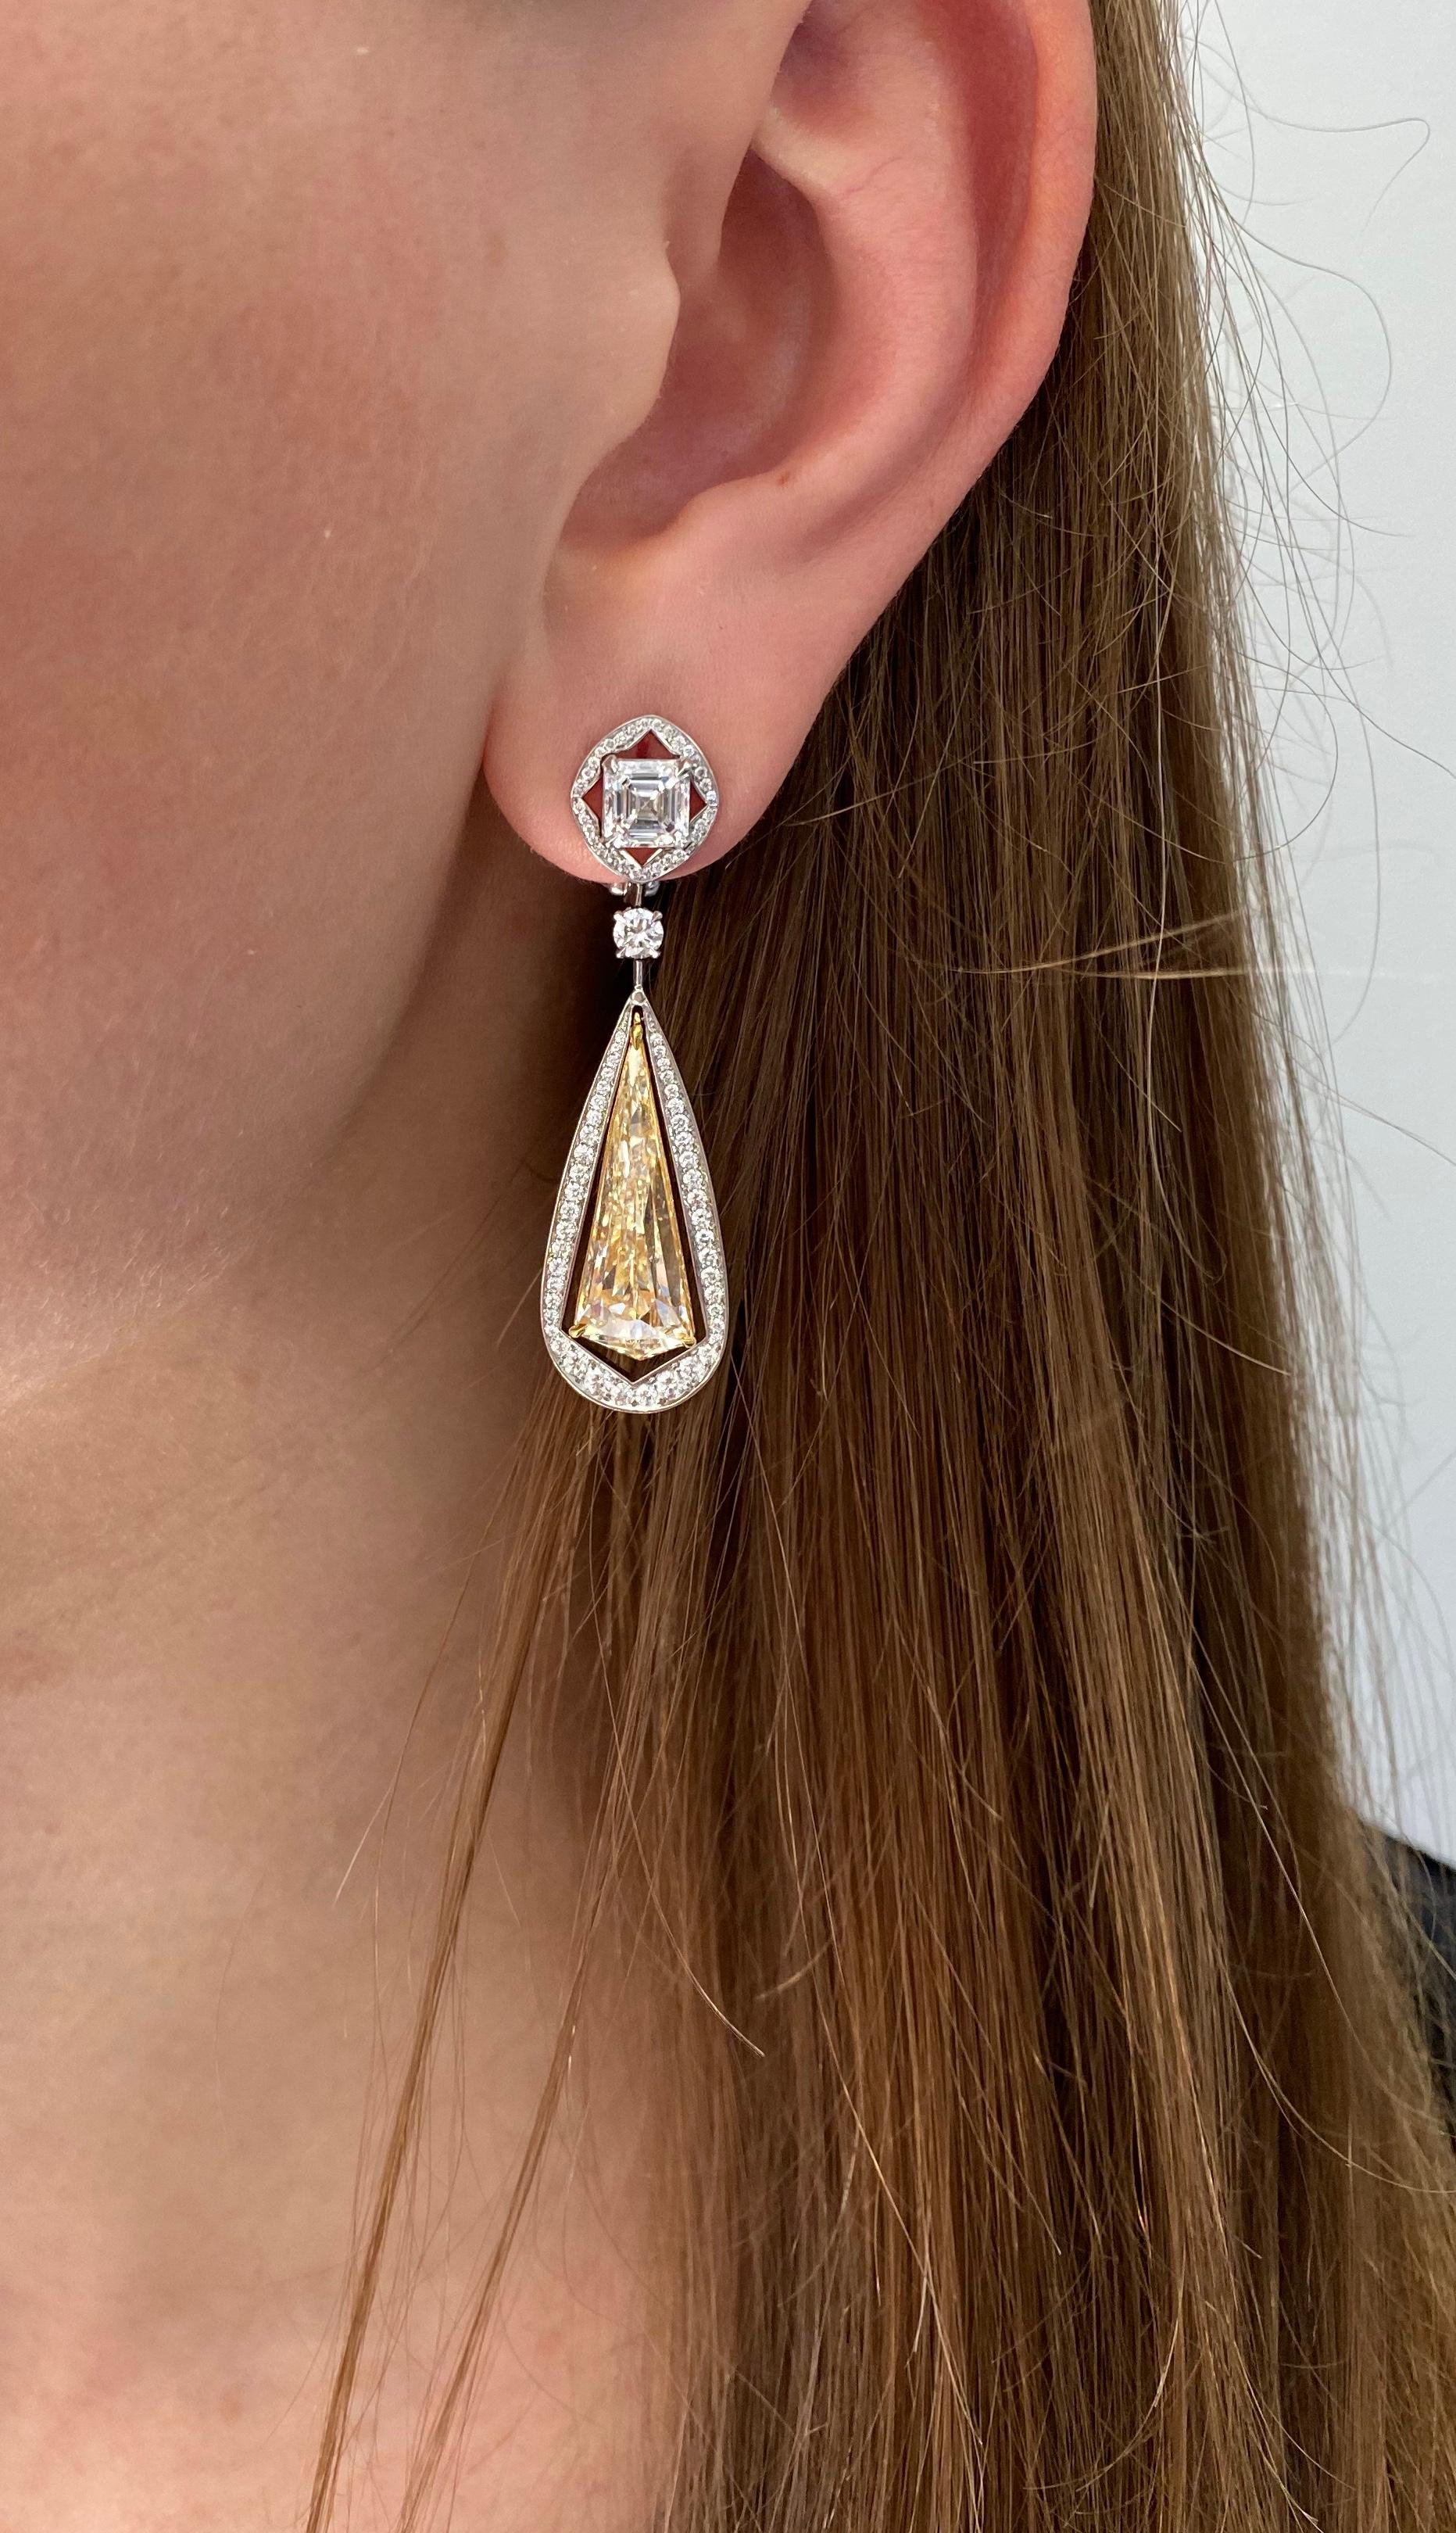 NALLY Unique 10.49 Carat Fancy Yellow Diamond Gold Drop Earrings In New Condition For Sale In New York, NY